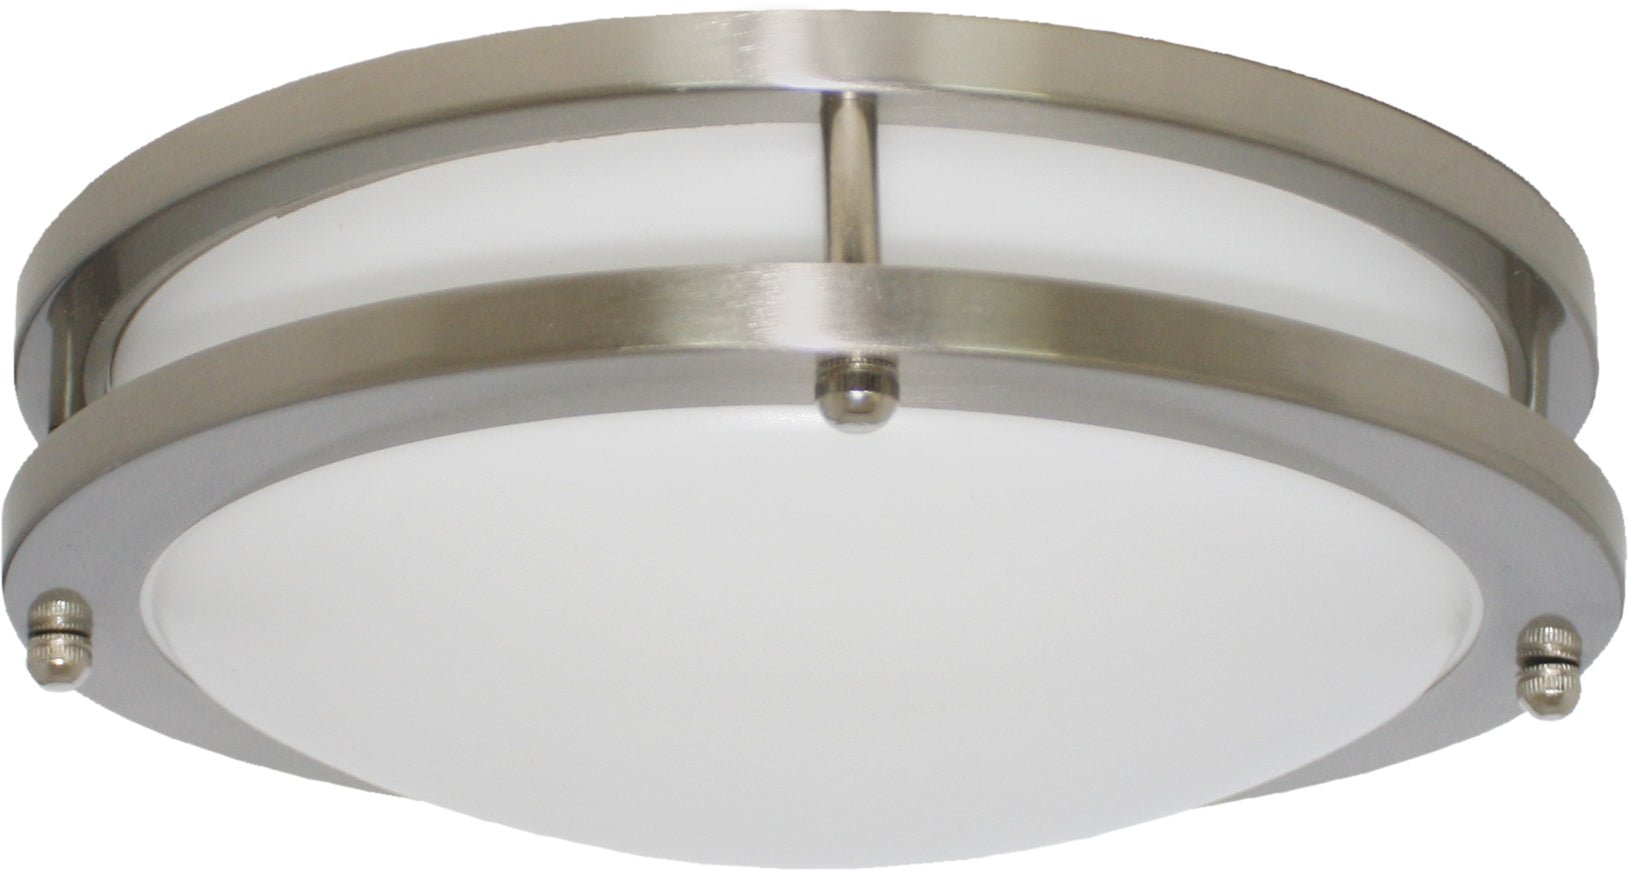 Elco 14" 25W Darby LED Standard Lumen Decorative Flush Mount Light with 5-CCT Switch - Sonic Electric